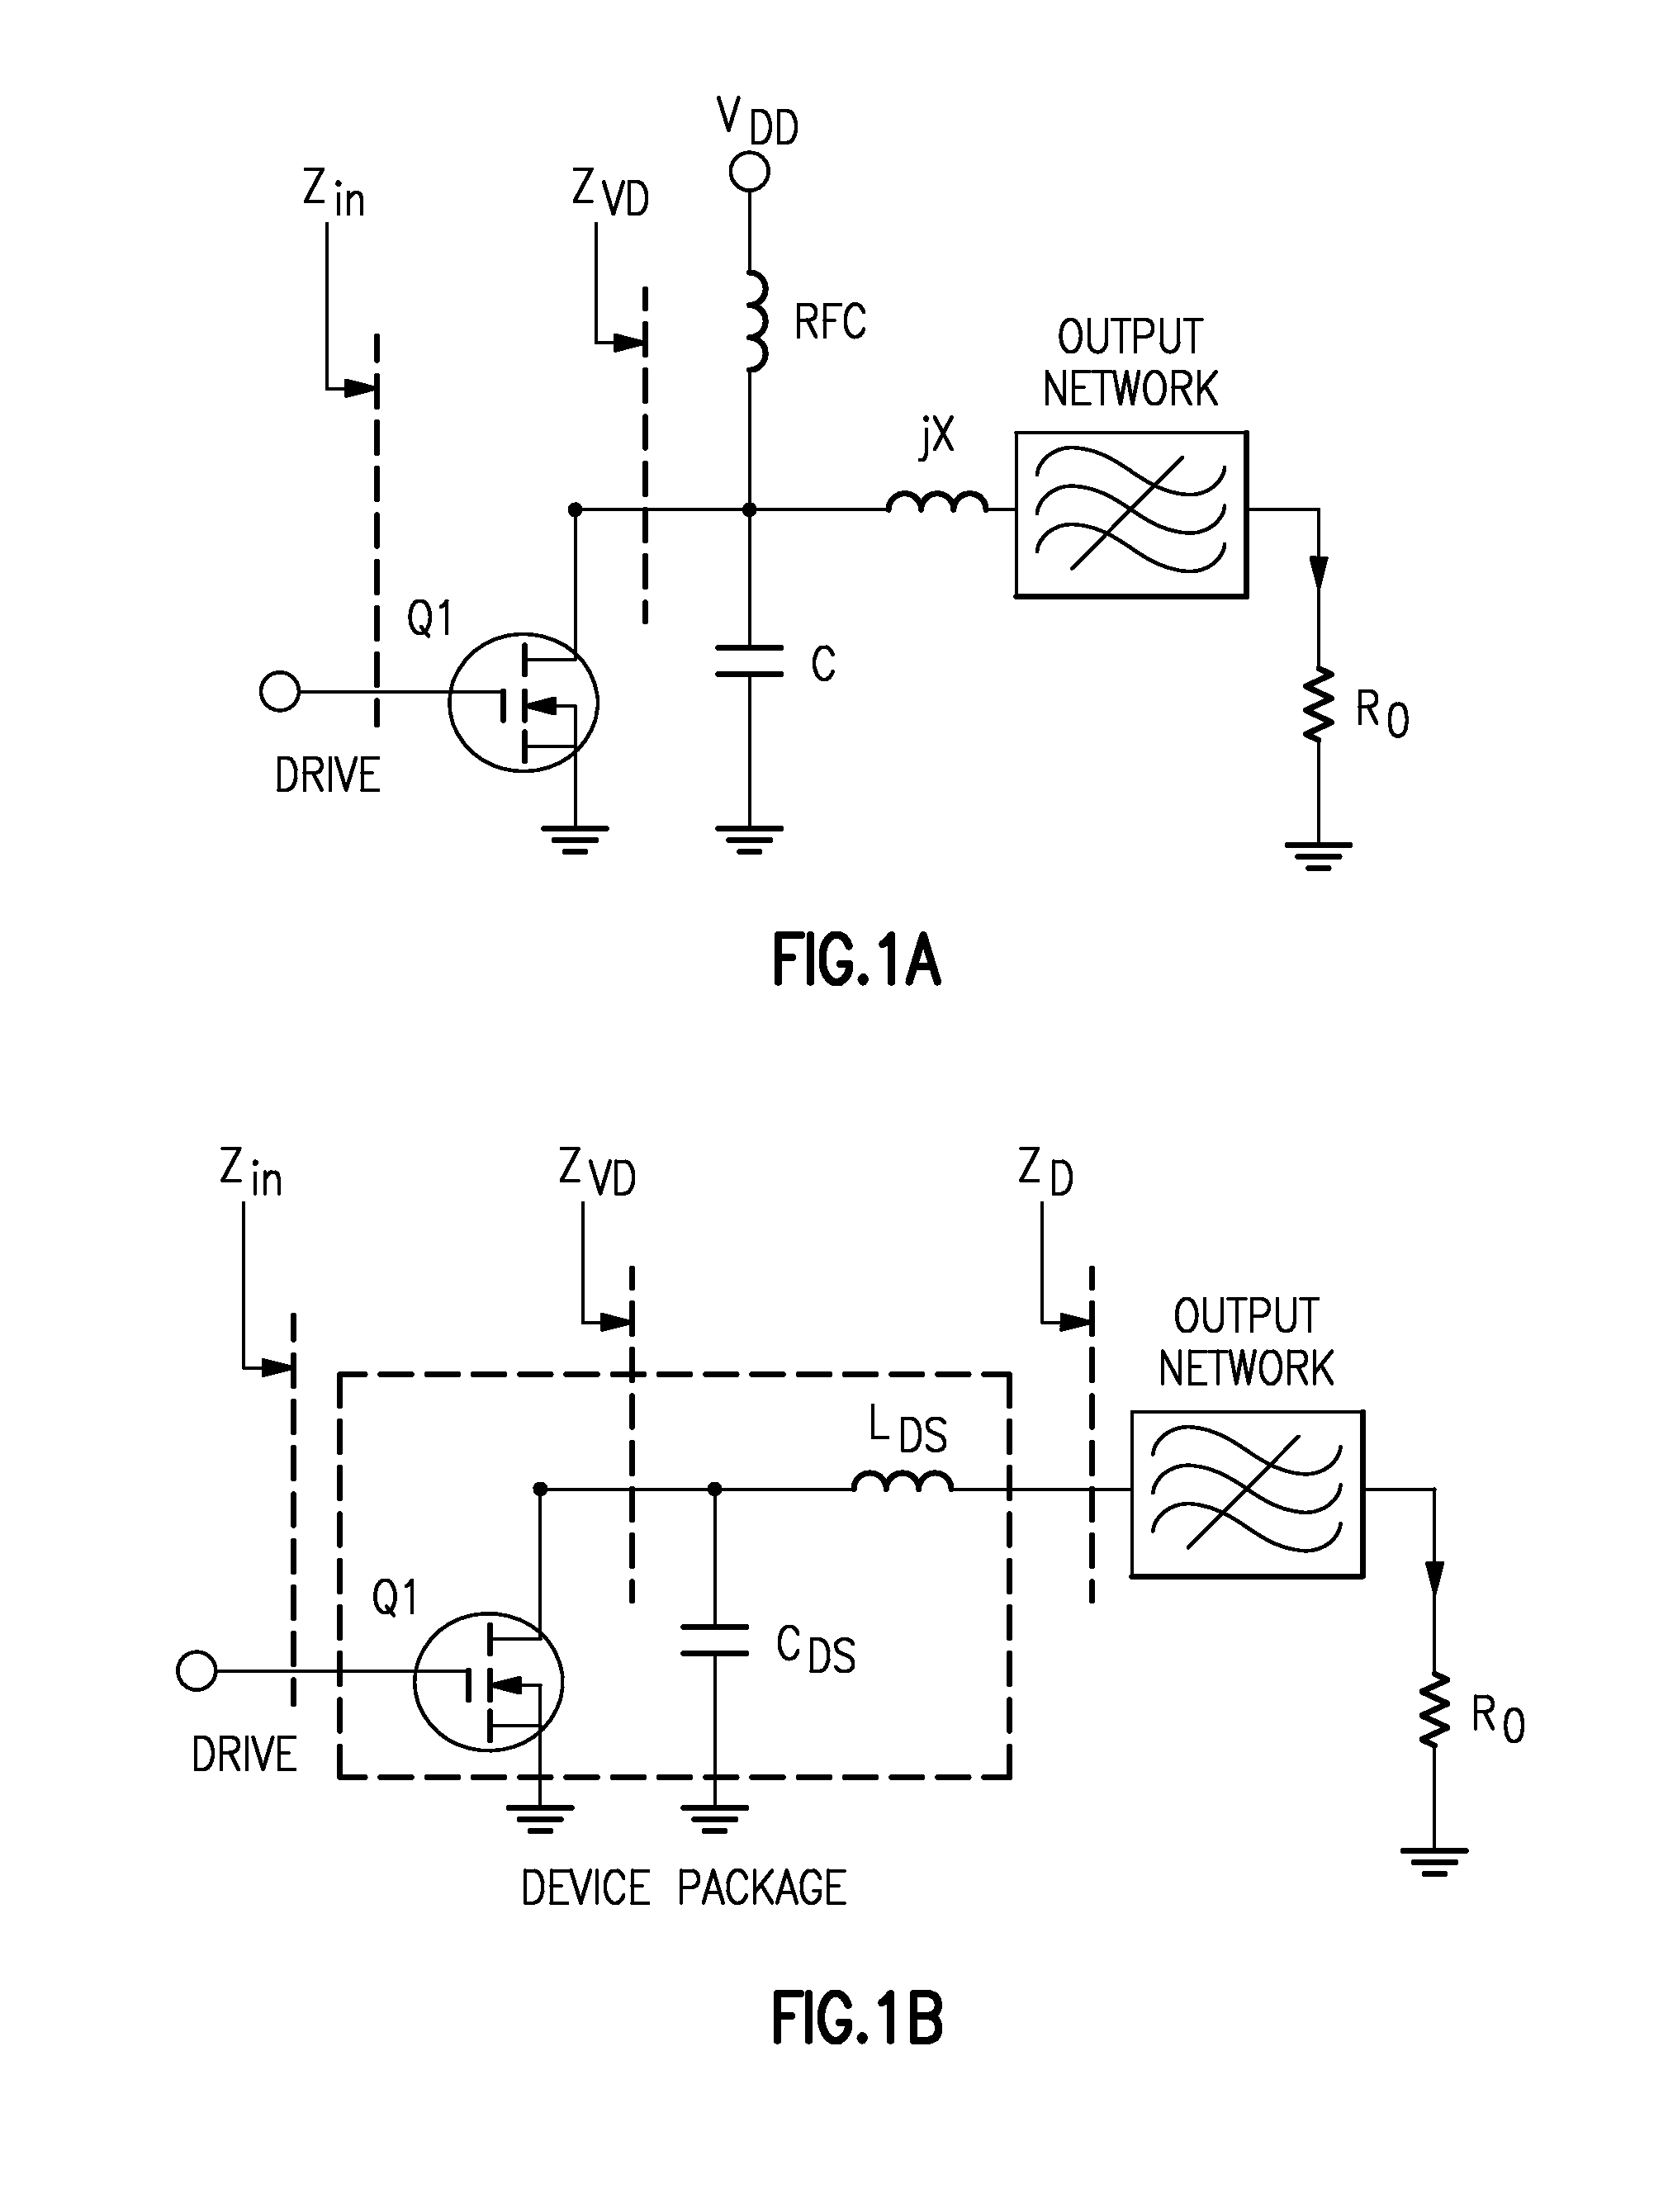 Circuits and methods related to power amplifier efficiency based on multi-harmonic approximation